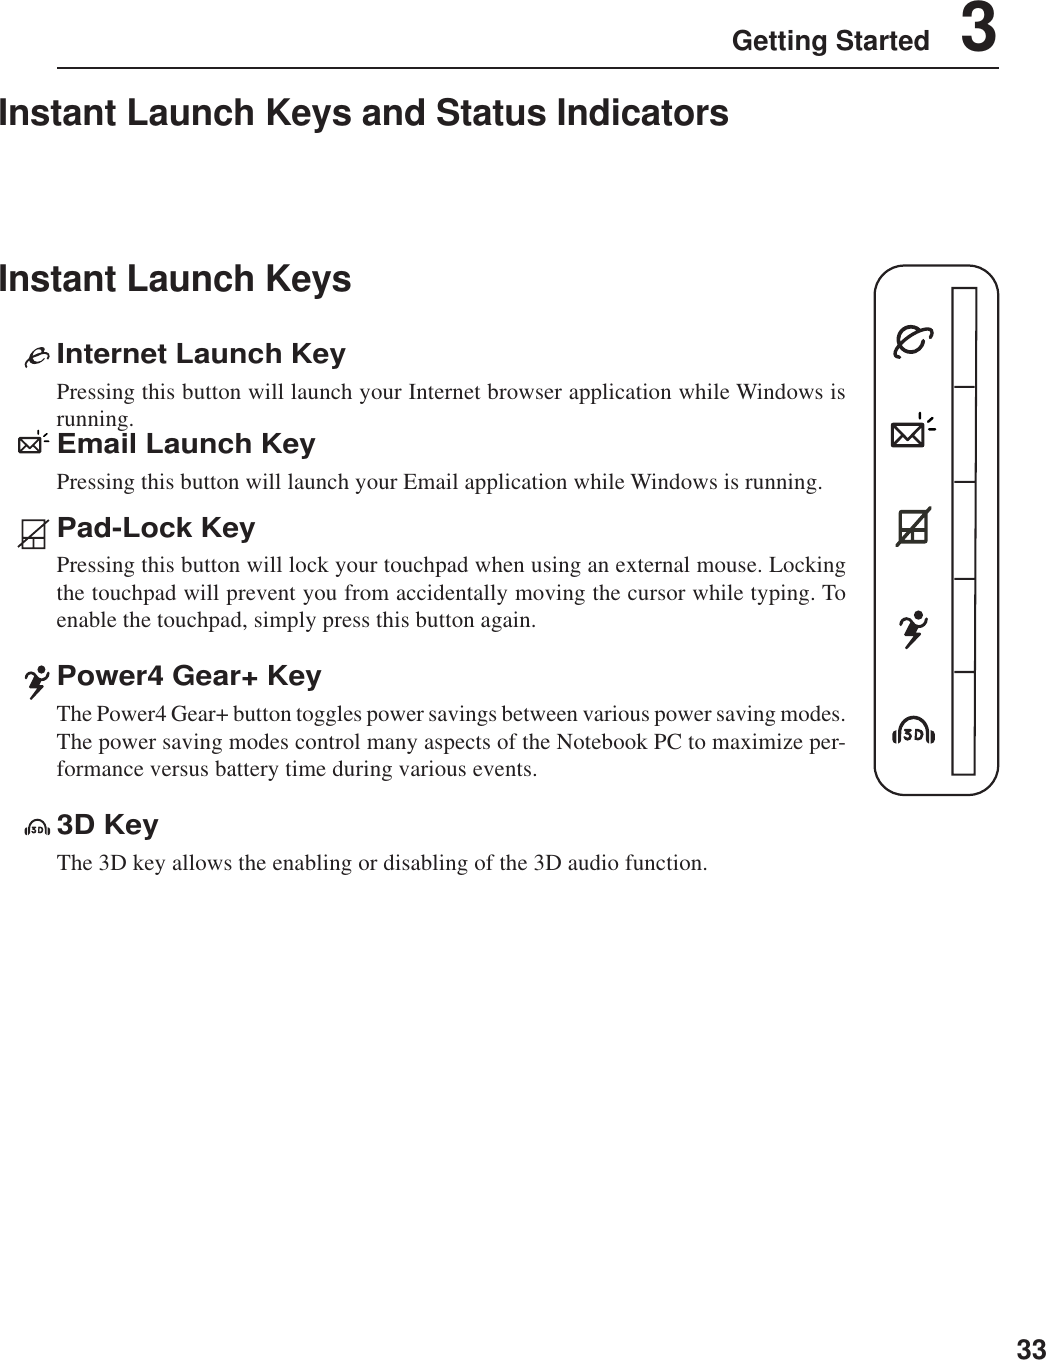 33Getting Started    3Instant Launch KeysInstant Launch Keys and Status IndicatorsEmail Launch KeyPressing this button will launch your Email application while Windows is running.Internet Launch KeyPressing this button will launch your Internet browser application while Windows isrunning.Pad-Lock KeyPressing this button will lock your touchpad when using an external mouse. Lockingthe touchpad will prevent you from accidentally moving the cursor while typing. Toenable the touchpad, simply press this button again.Power4 Gear+ KeyThe Power4 Gear+ button toggles power savings between various power saving modes.The power saving modes control many aspects of the Notebook PC to maximize per-formance versus battery time during various events.3D KeyThe 3D key allows the enabling or disabling of the 3D audio function.